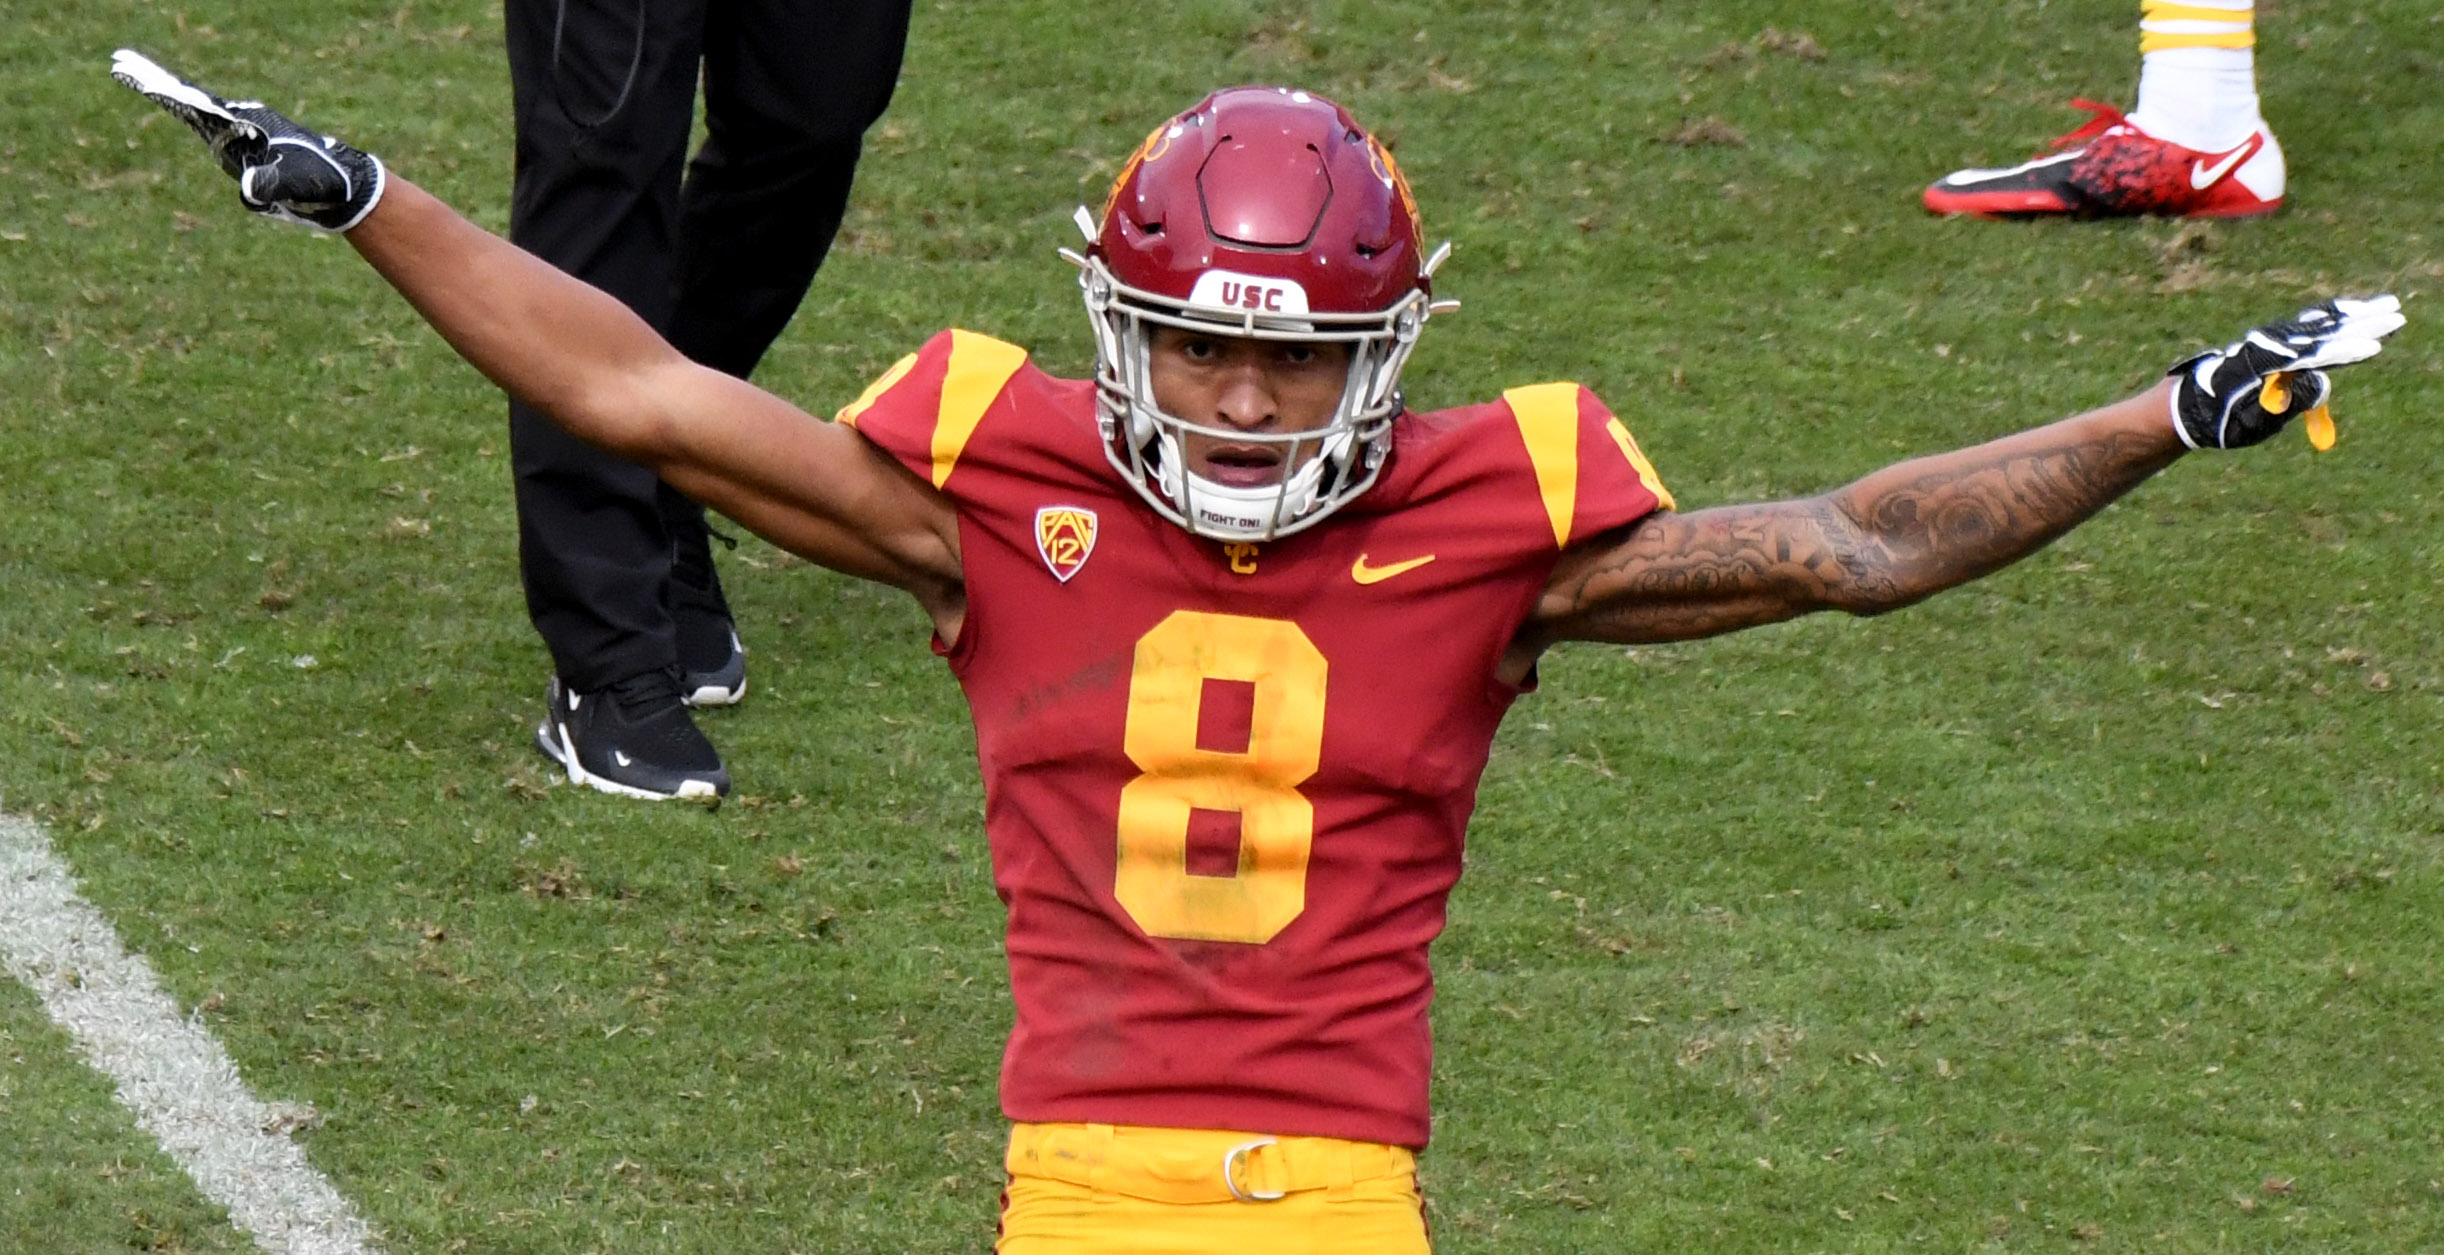 USC Trojans defeated the Arizona State Sun Devils 28-27 during a NCAA Football game.